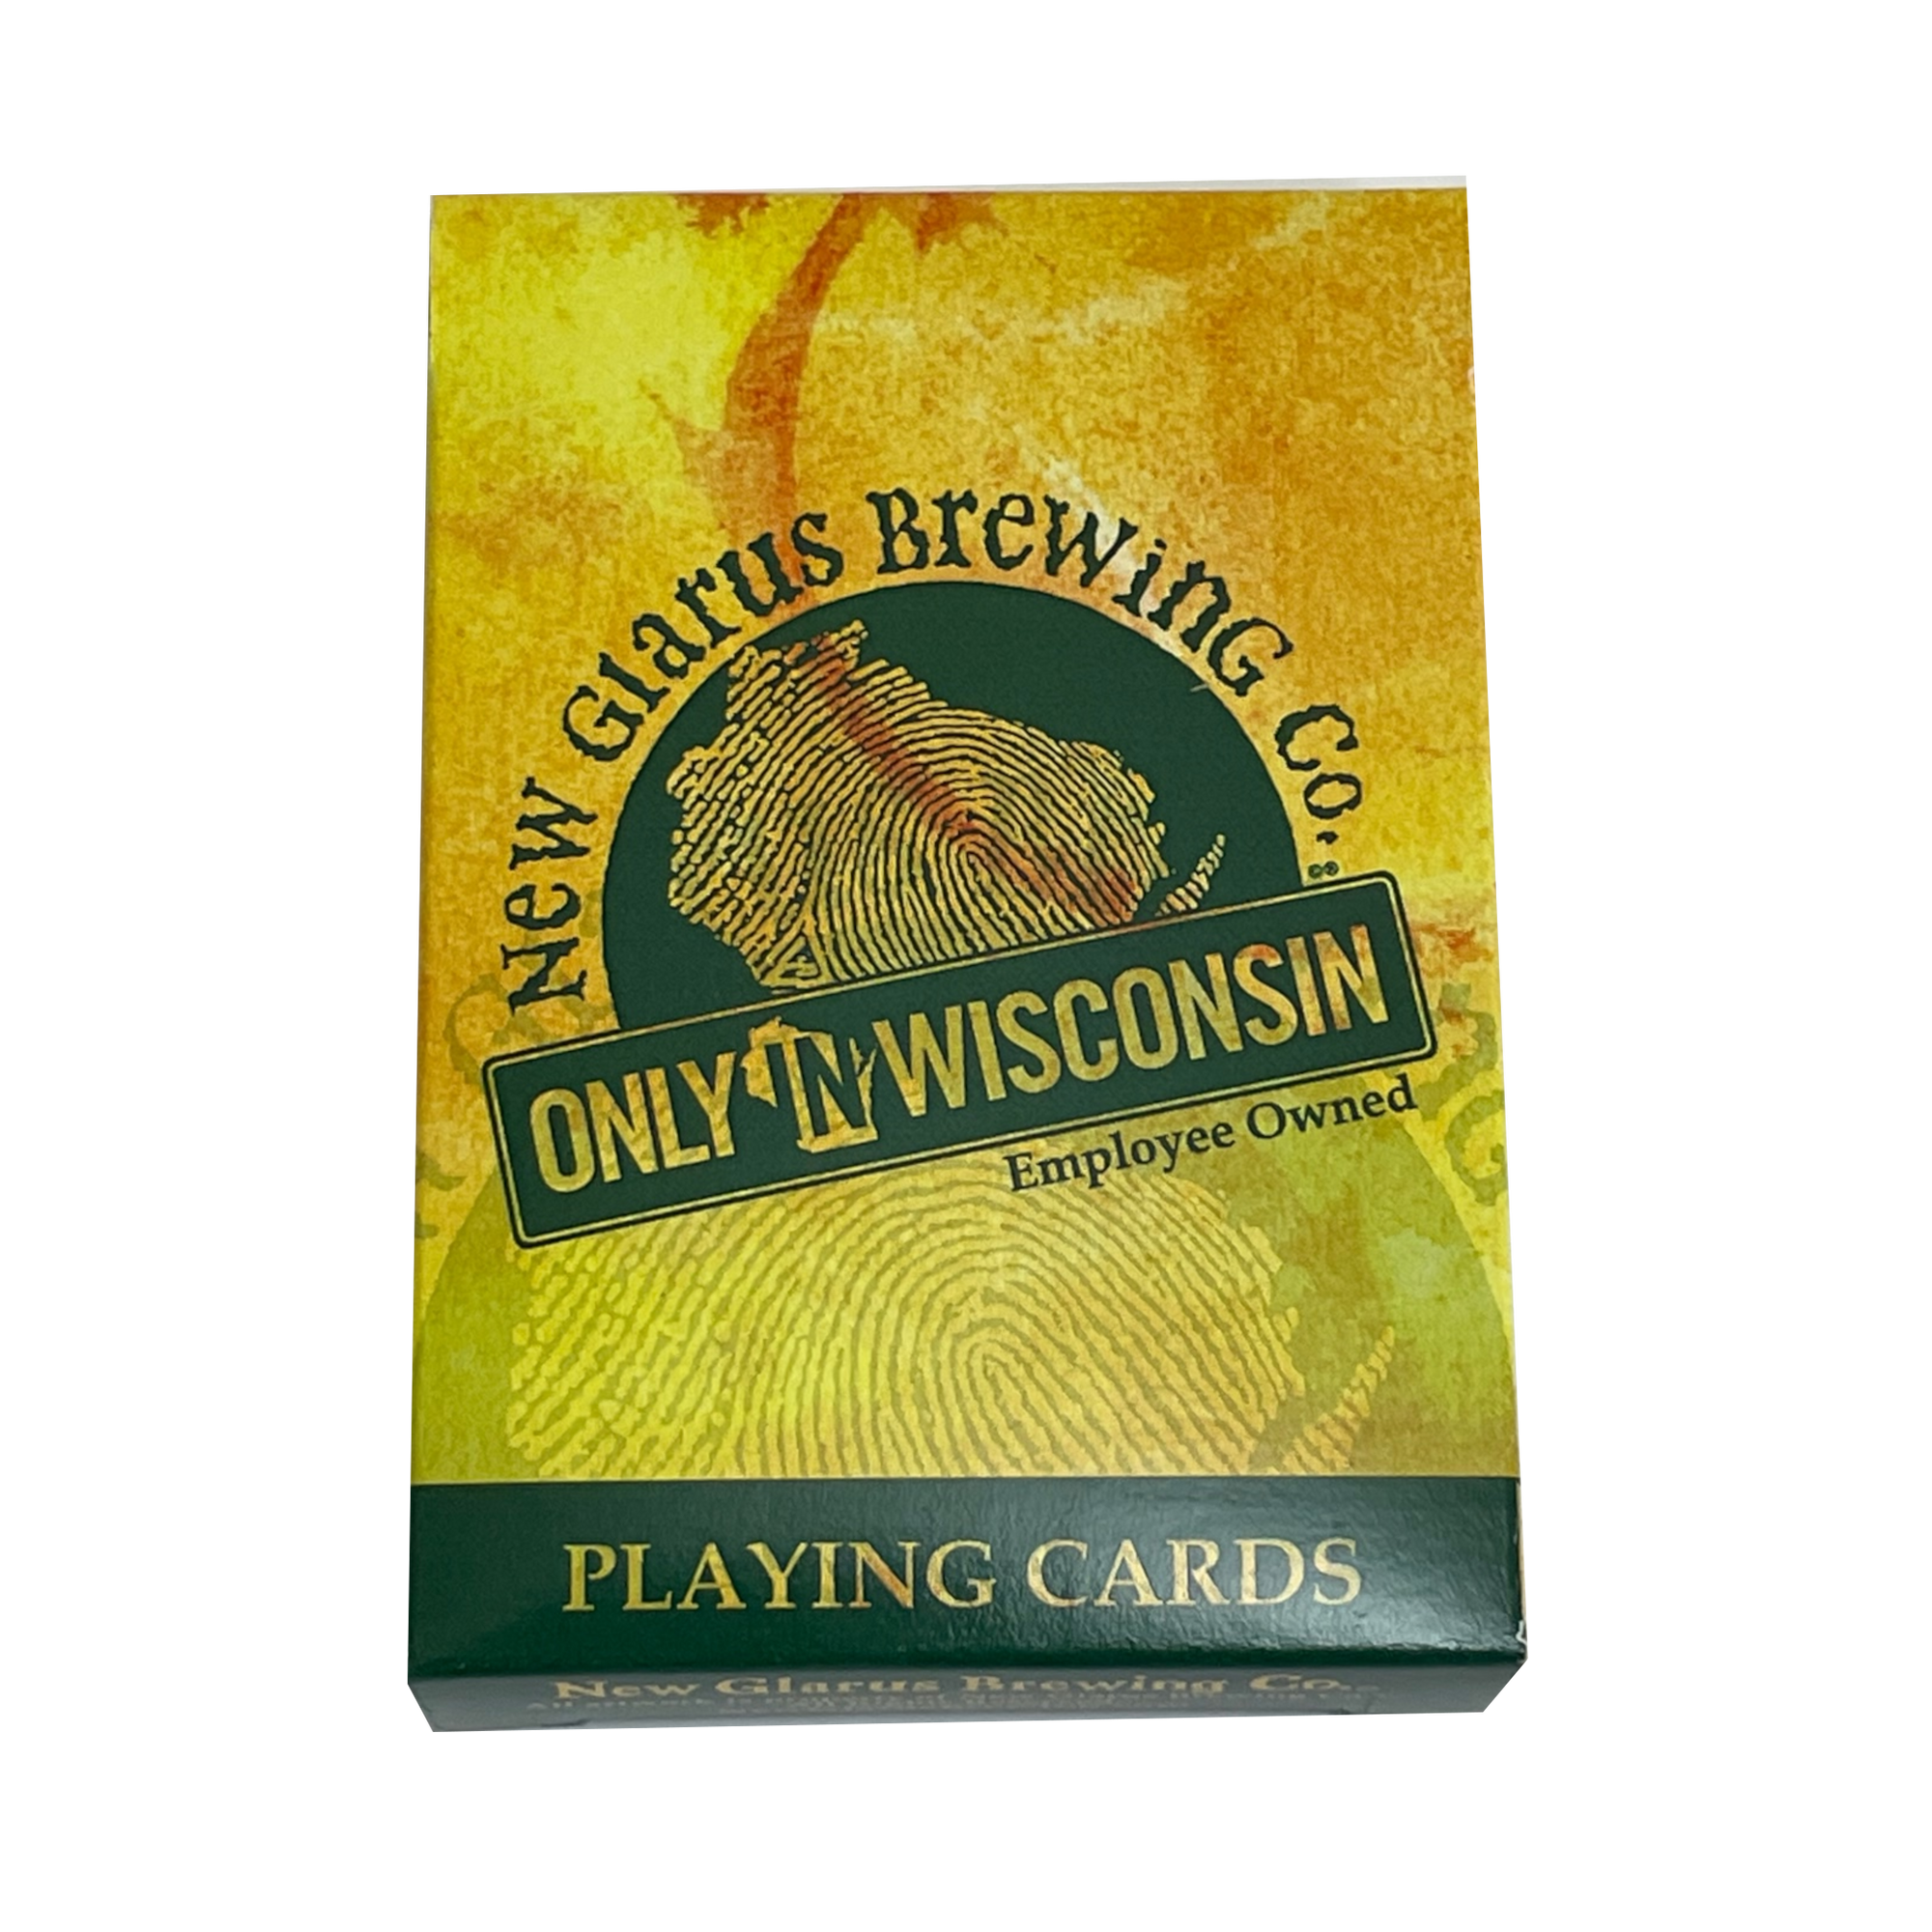 Deck of cards in yellow and green packaging.